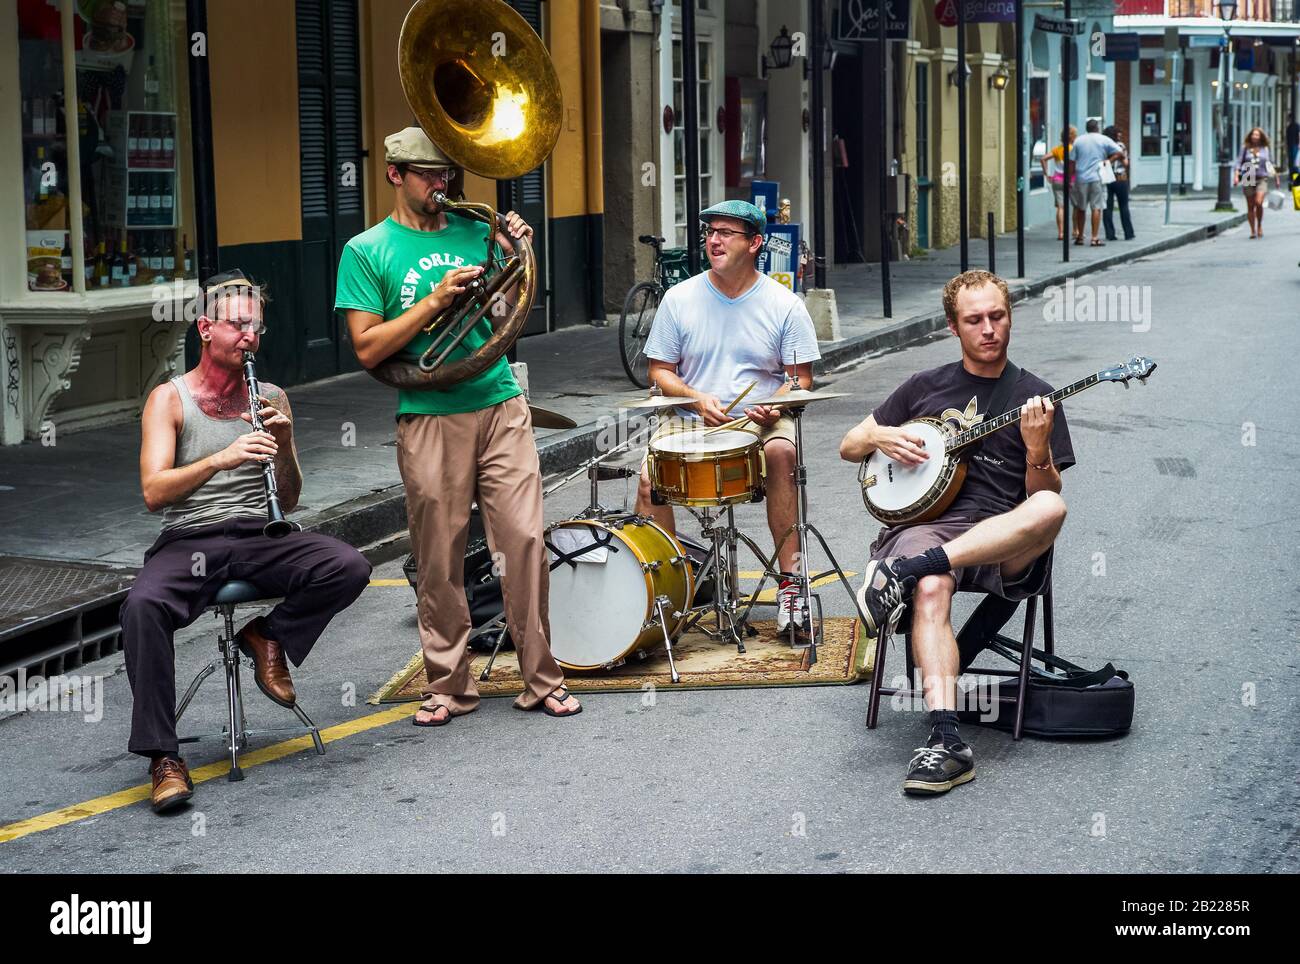 New Orleans, Louisiana, United States - July 17 2009: Jazz Band with Sousaphone, Clarinet, Banjo and Drums Playing Outdoors on Bourbon Street. Stock Photo